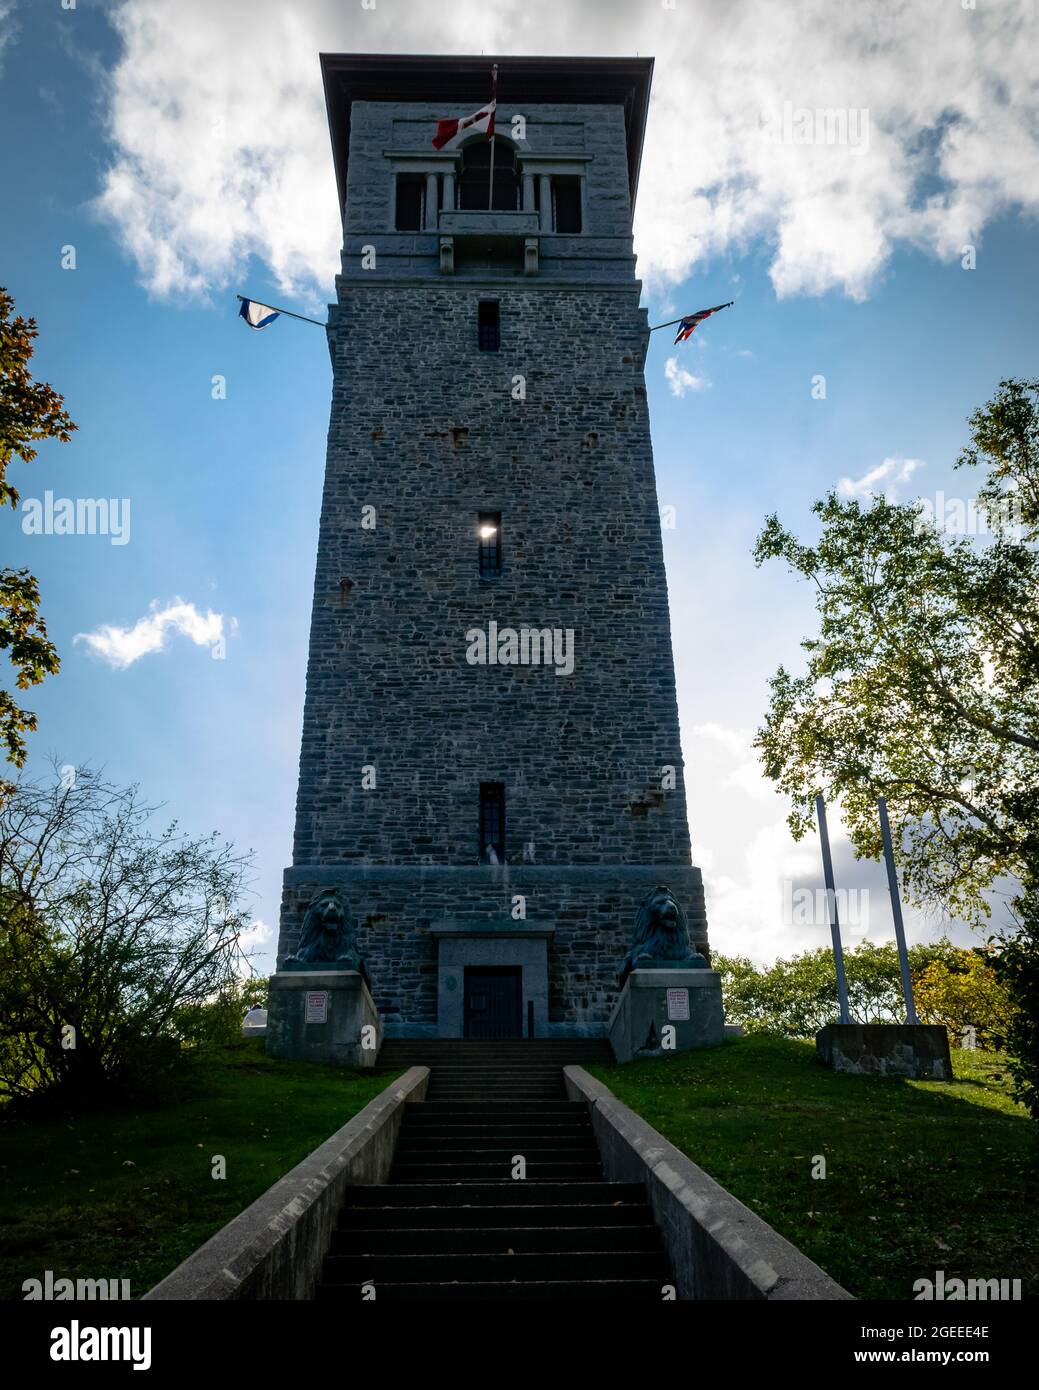 looking up the steps to dingle memorial tower in Sir Sandford Fleming Park, on a beautiful clear day in the end of fall Stock Photo